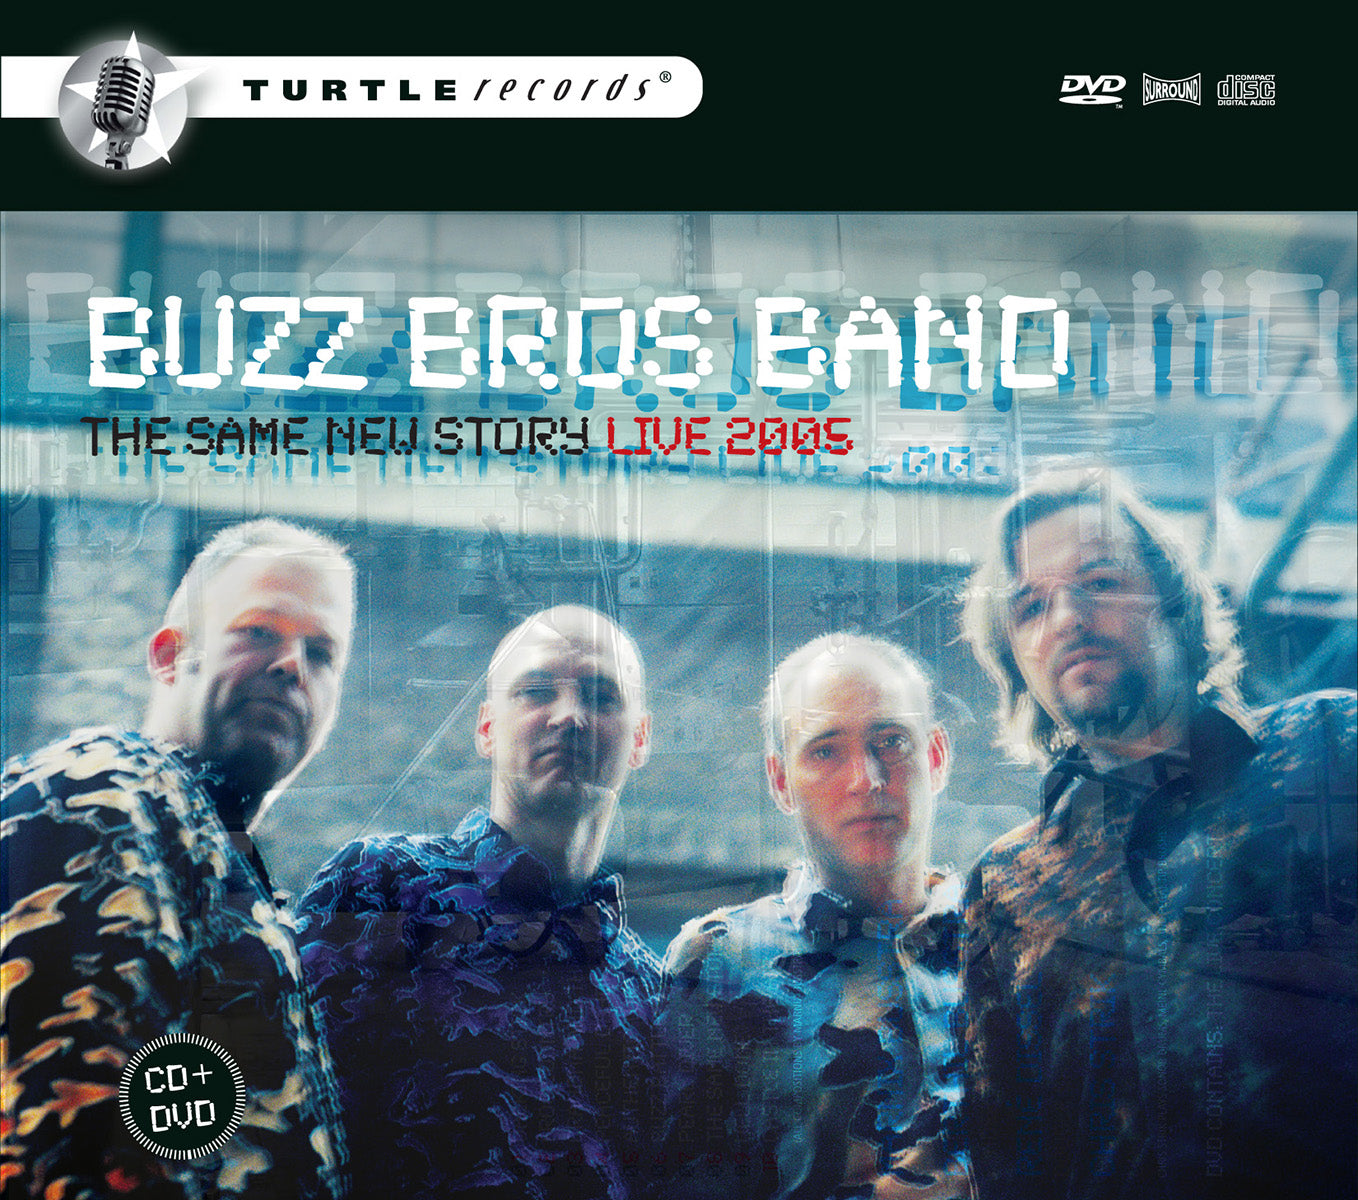 The　Same　(CD+DVD)　Band:　2005　–　Live　The　Spirit　New　Bros　of　Turtle　Buzz　Story